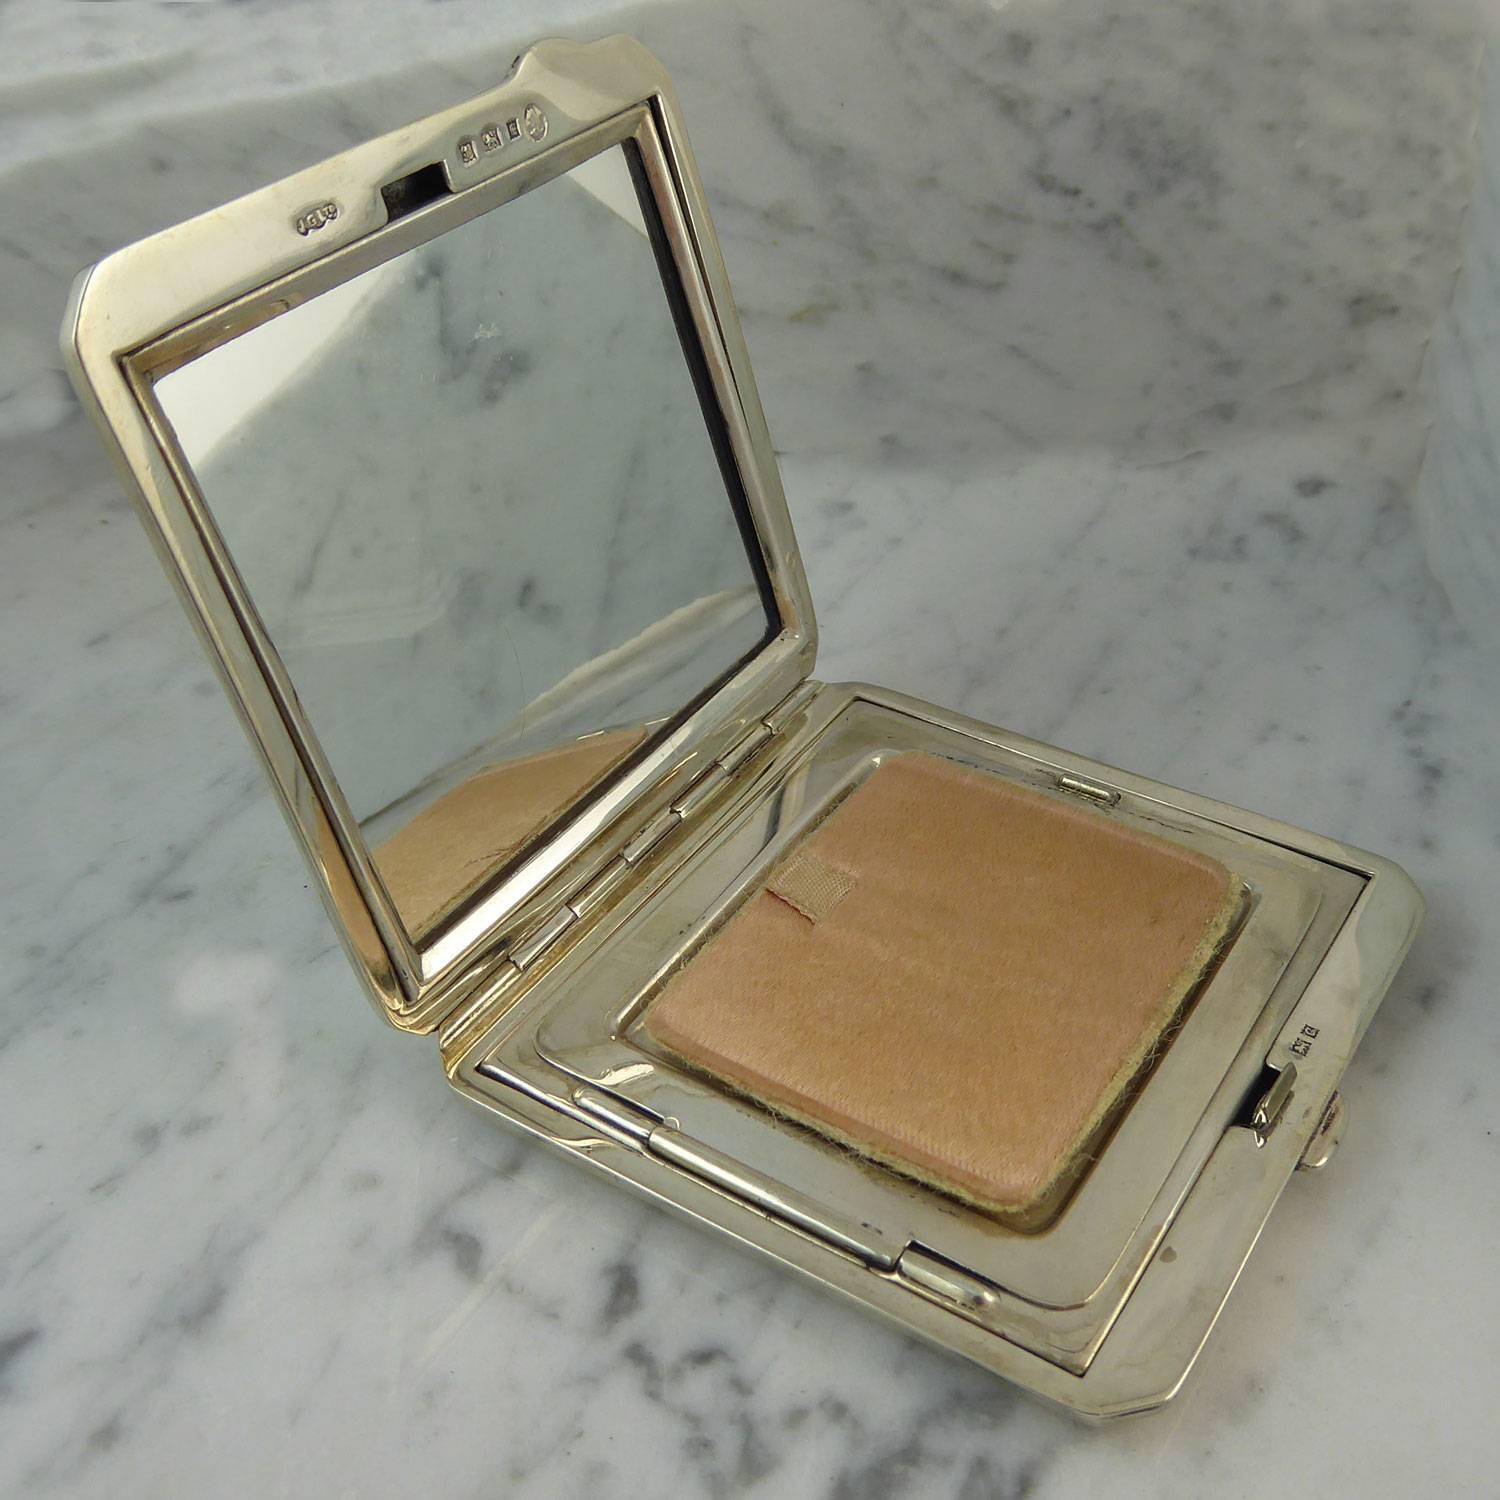 Women's Vintage Silver & Enamelled Floral Powder Compact with Mirror, Hallmarked, 1952